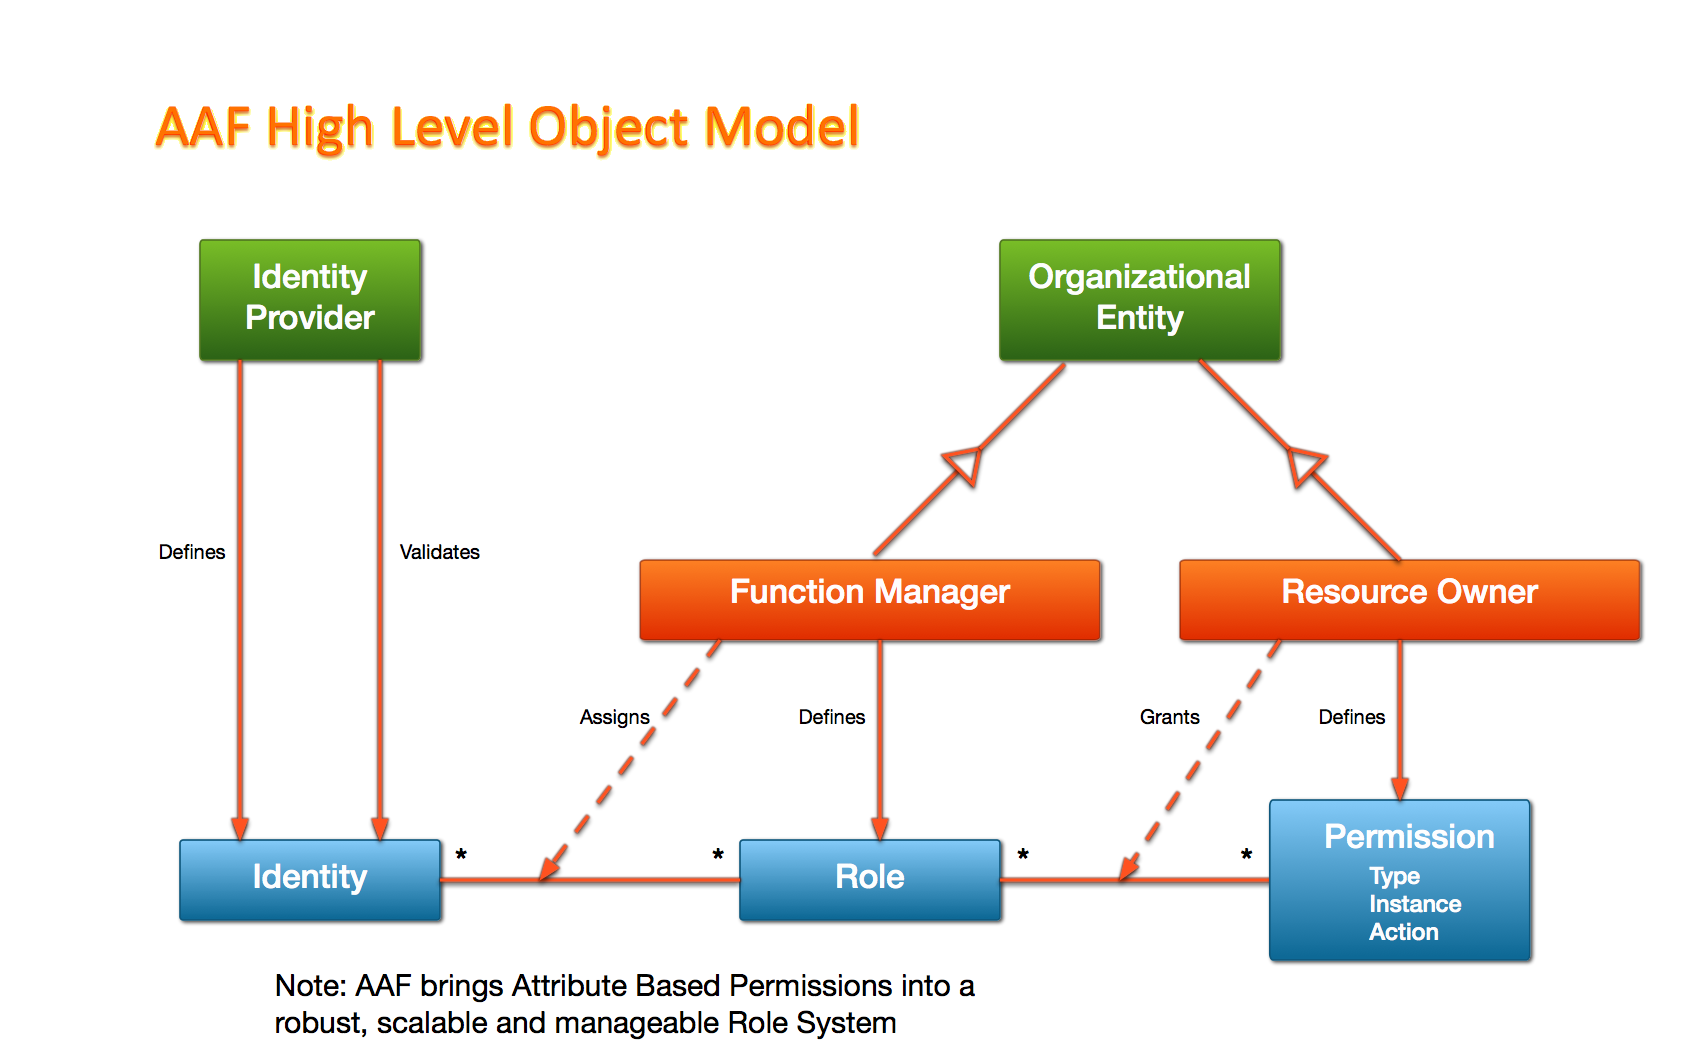 docs/sections/architecture/images/aaf-hl-object-model.png